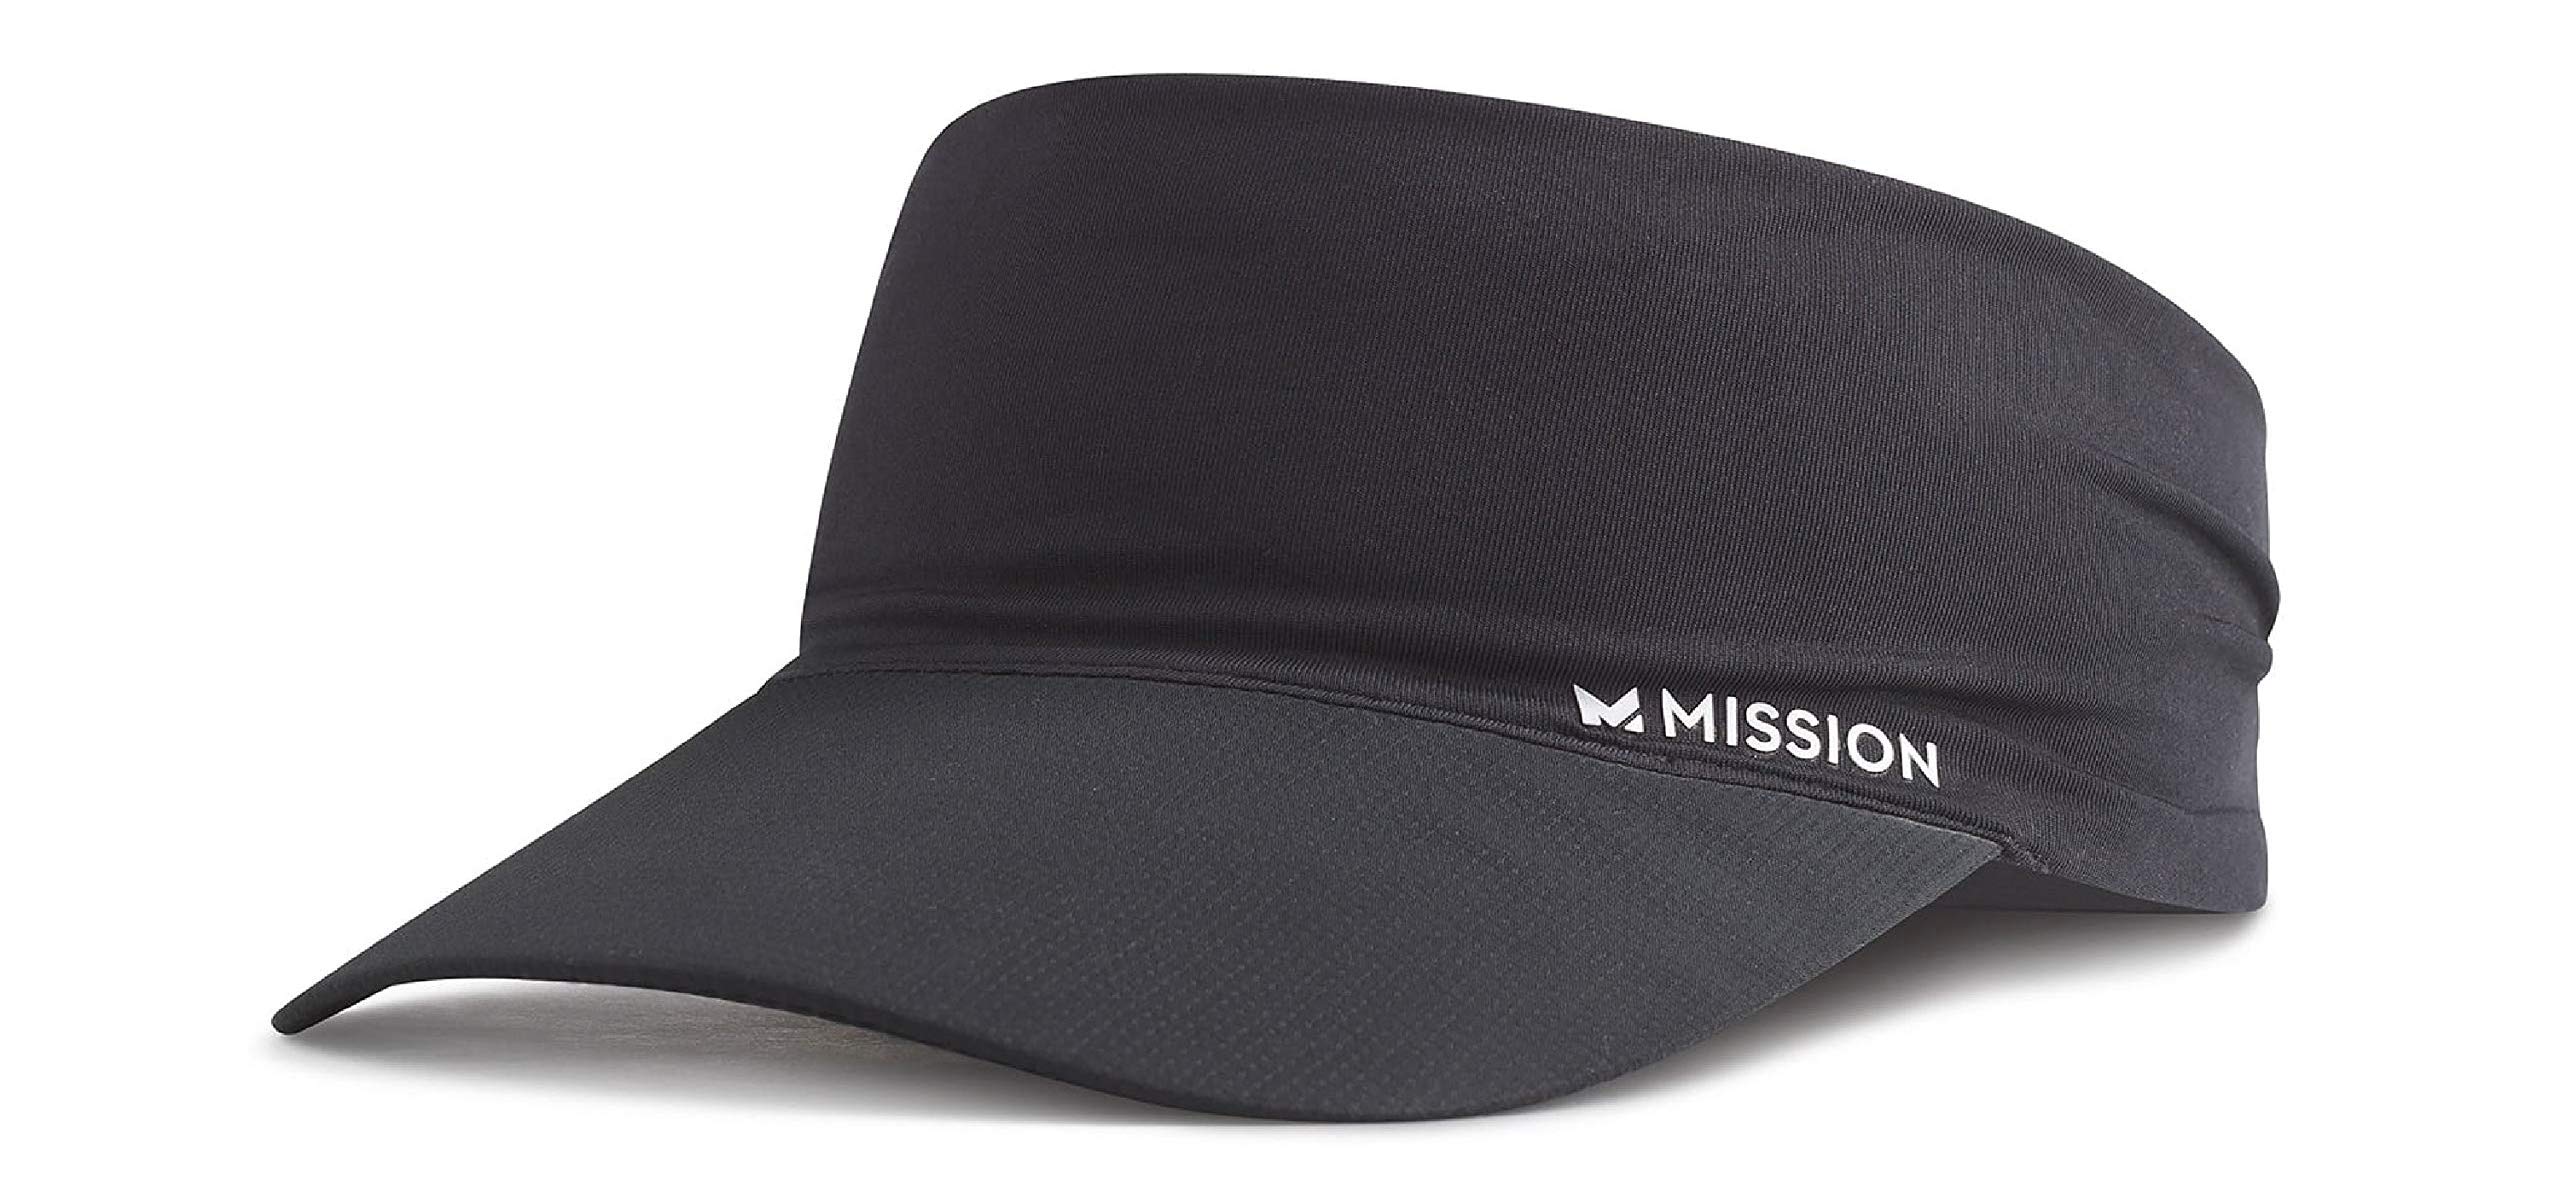 MISSION Cooling Performance Hat - Unisex Baseball Cap for Men and Women -  Instant-Cooling Fabric, Adjustable Fit